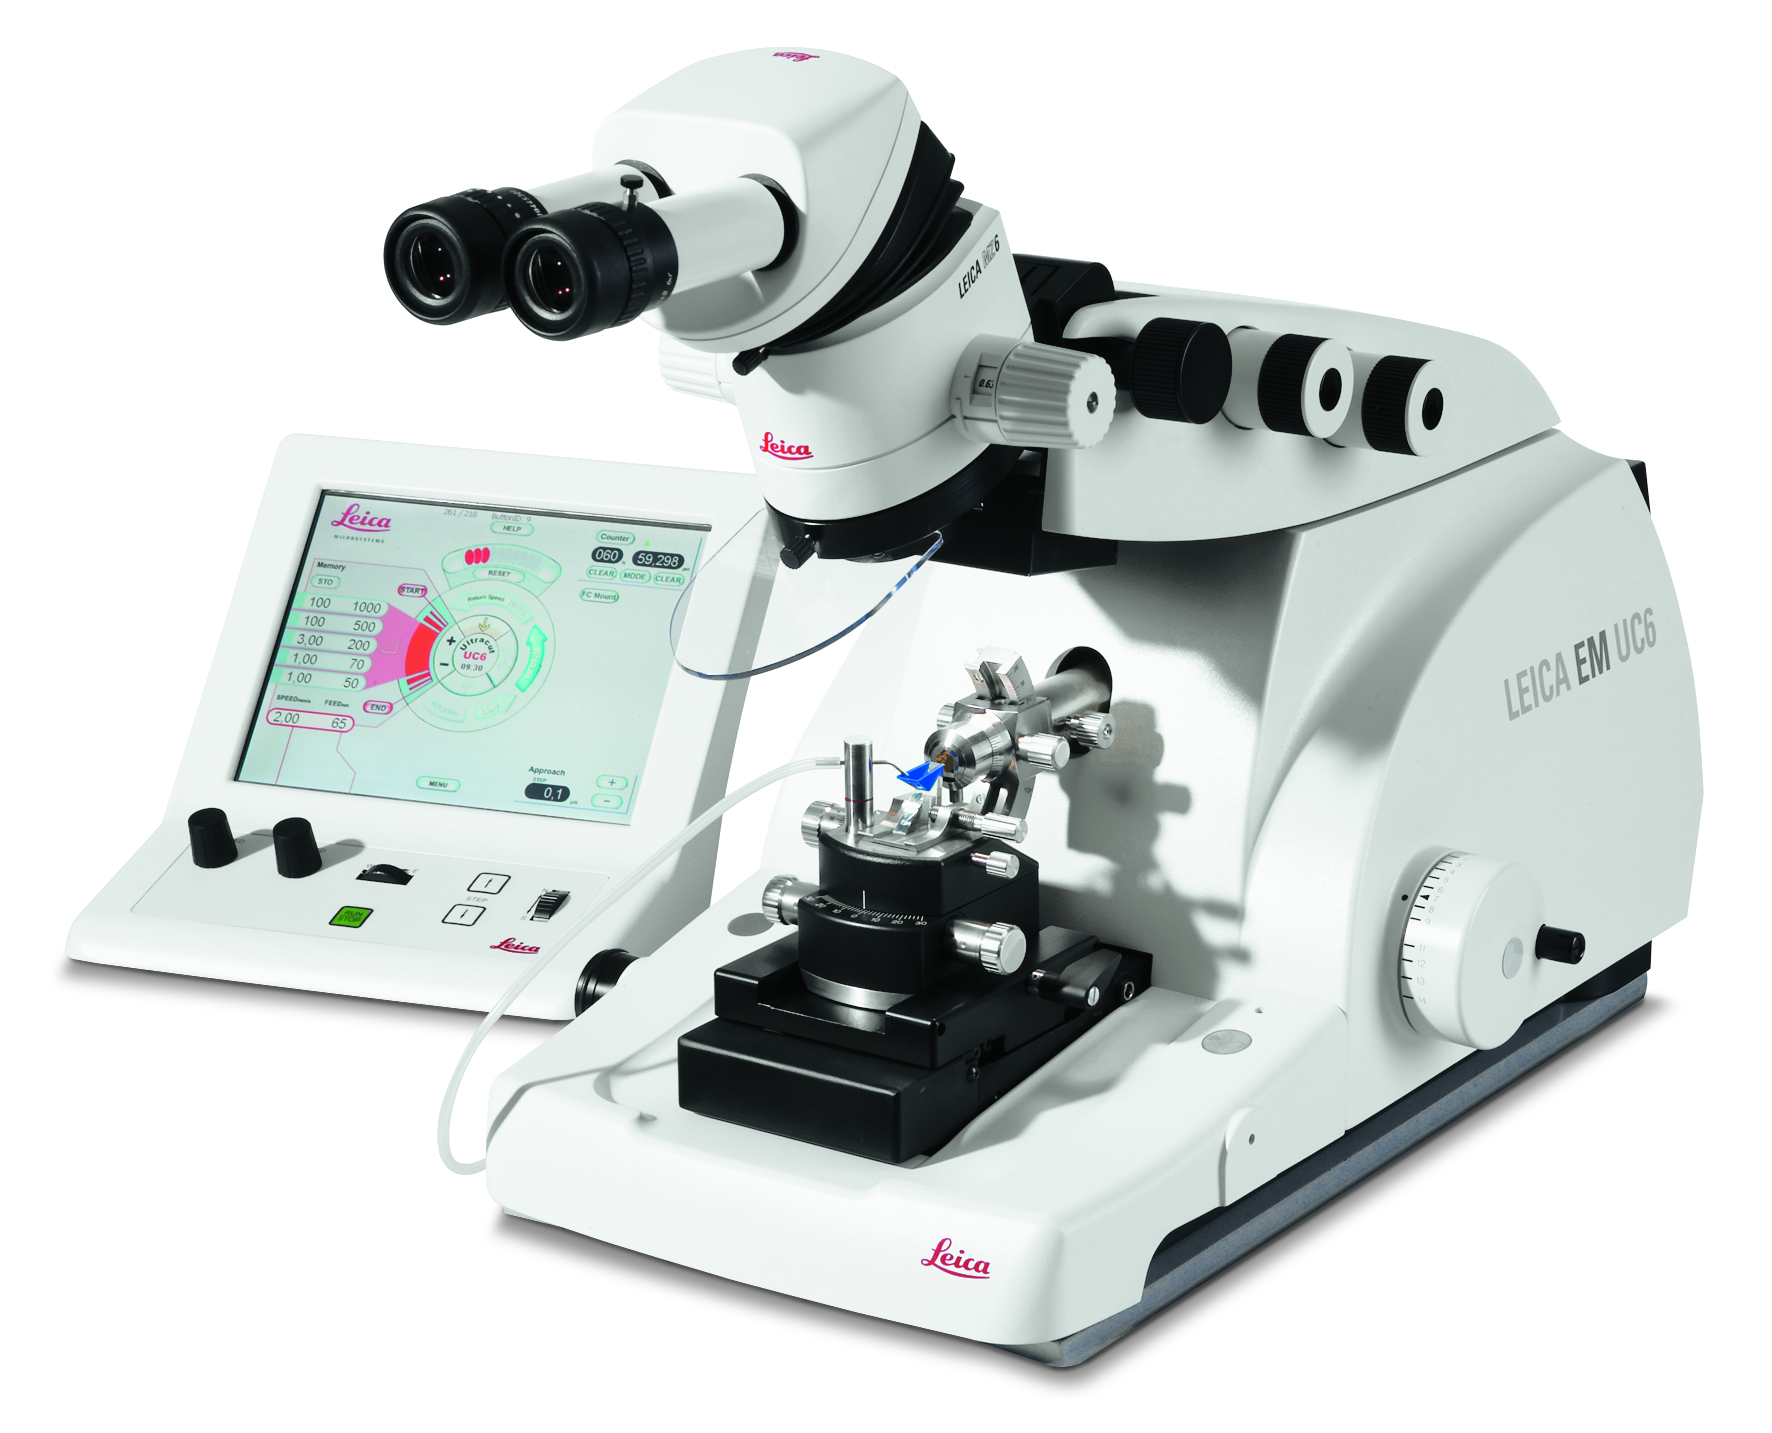 The Leica EM UC6 Ultramicrotome for ultrathin sectioning of biological and industrial specimen samples